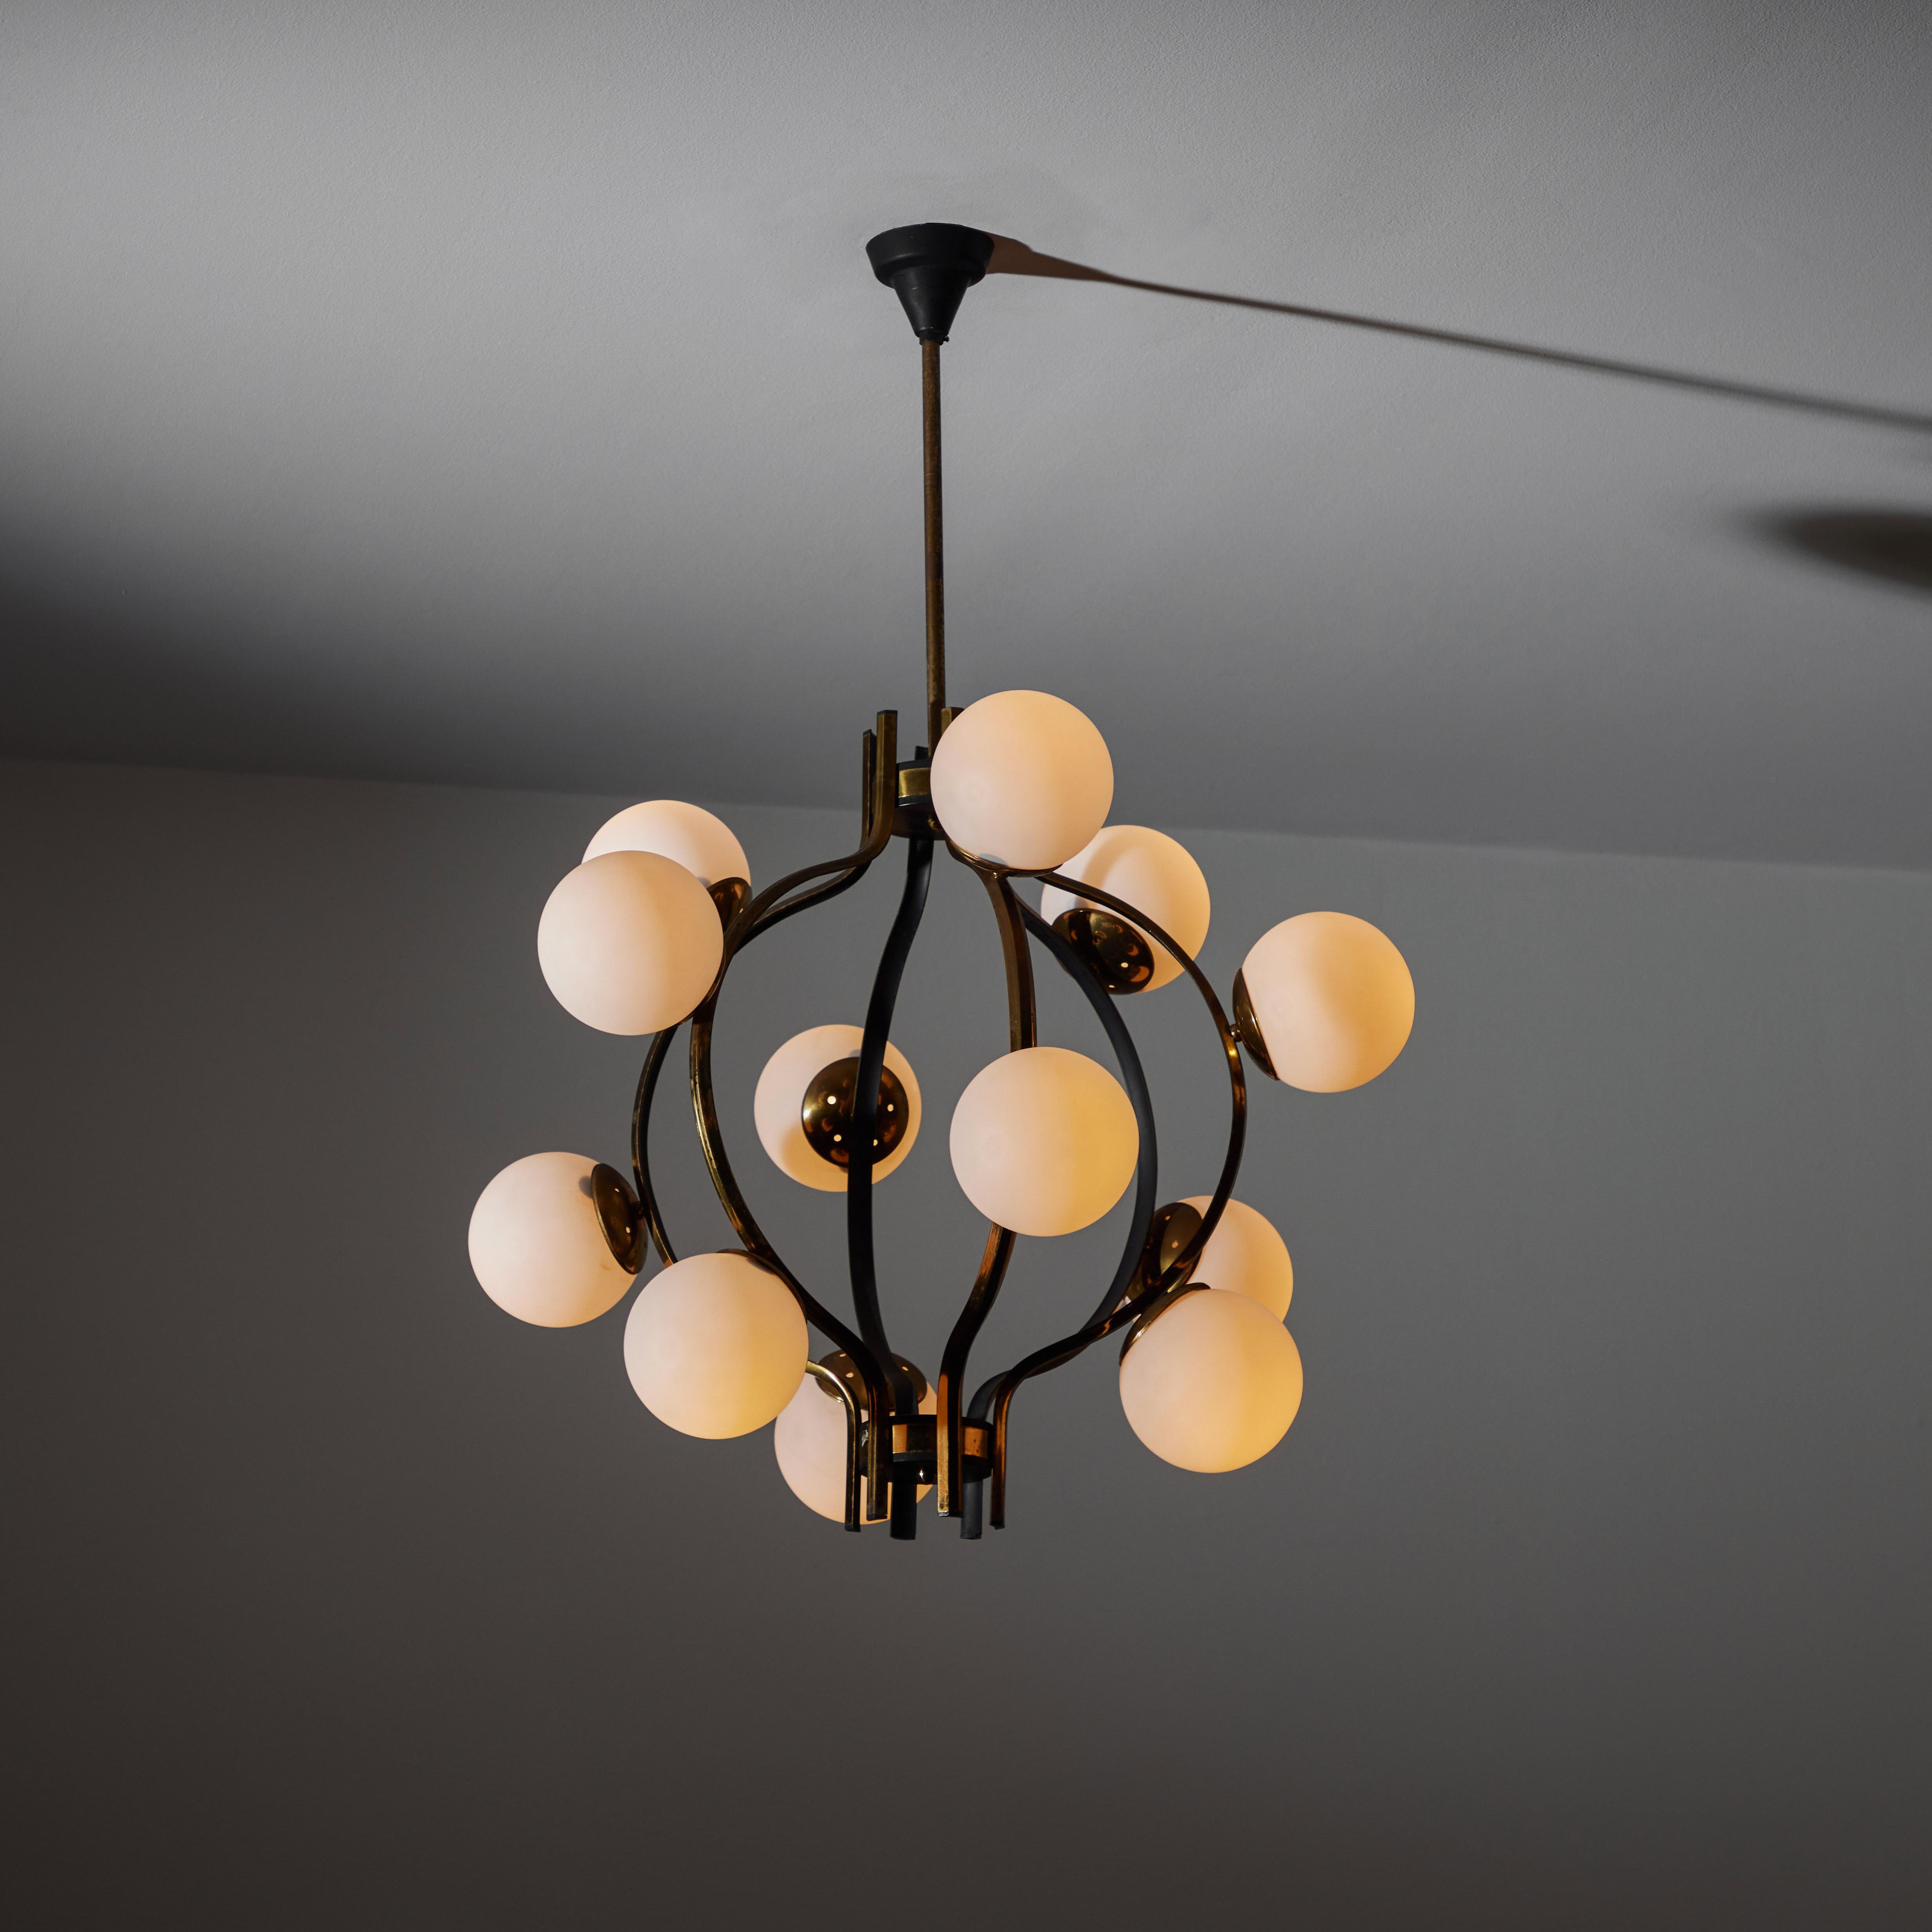 Chandelier by Stilnovo. Manufactured in Italy, circa the 1950s. Aged polished brass and painted black hardware throughout. Rewired for U.S. standards. Original canopy, custom brass ceiling plate. Eleven E14 20W Max bulbs recommend. Bulbs are